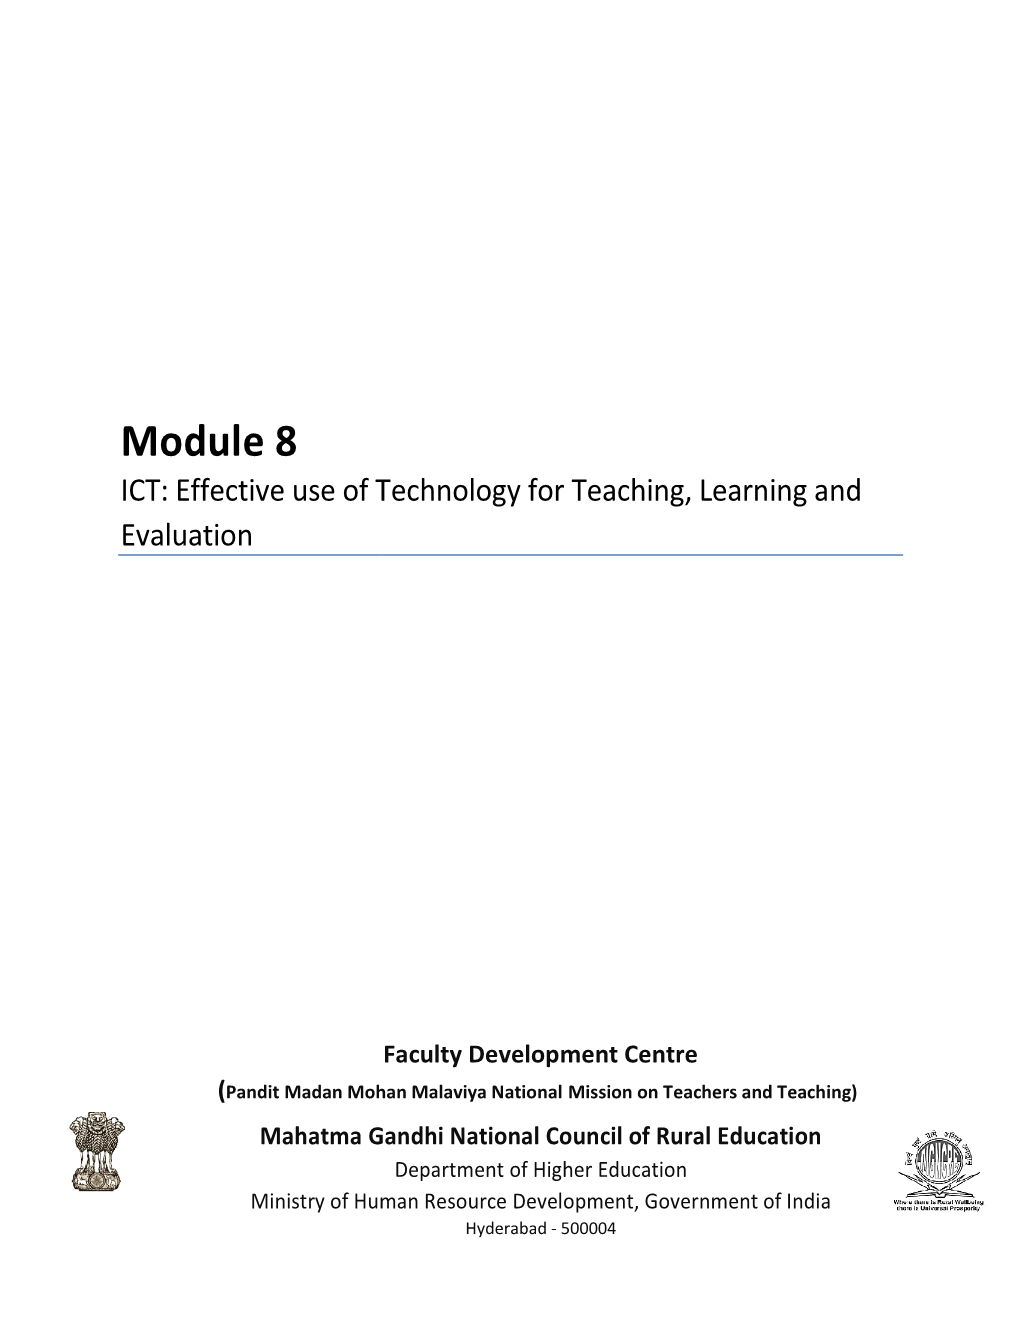 Module 8 ICT: Effective Use of Technology for Teaching, Learning and Evaluation